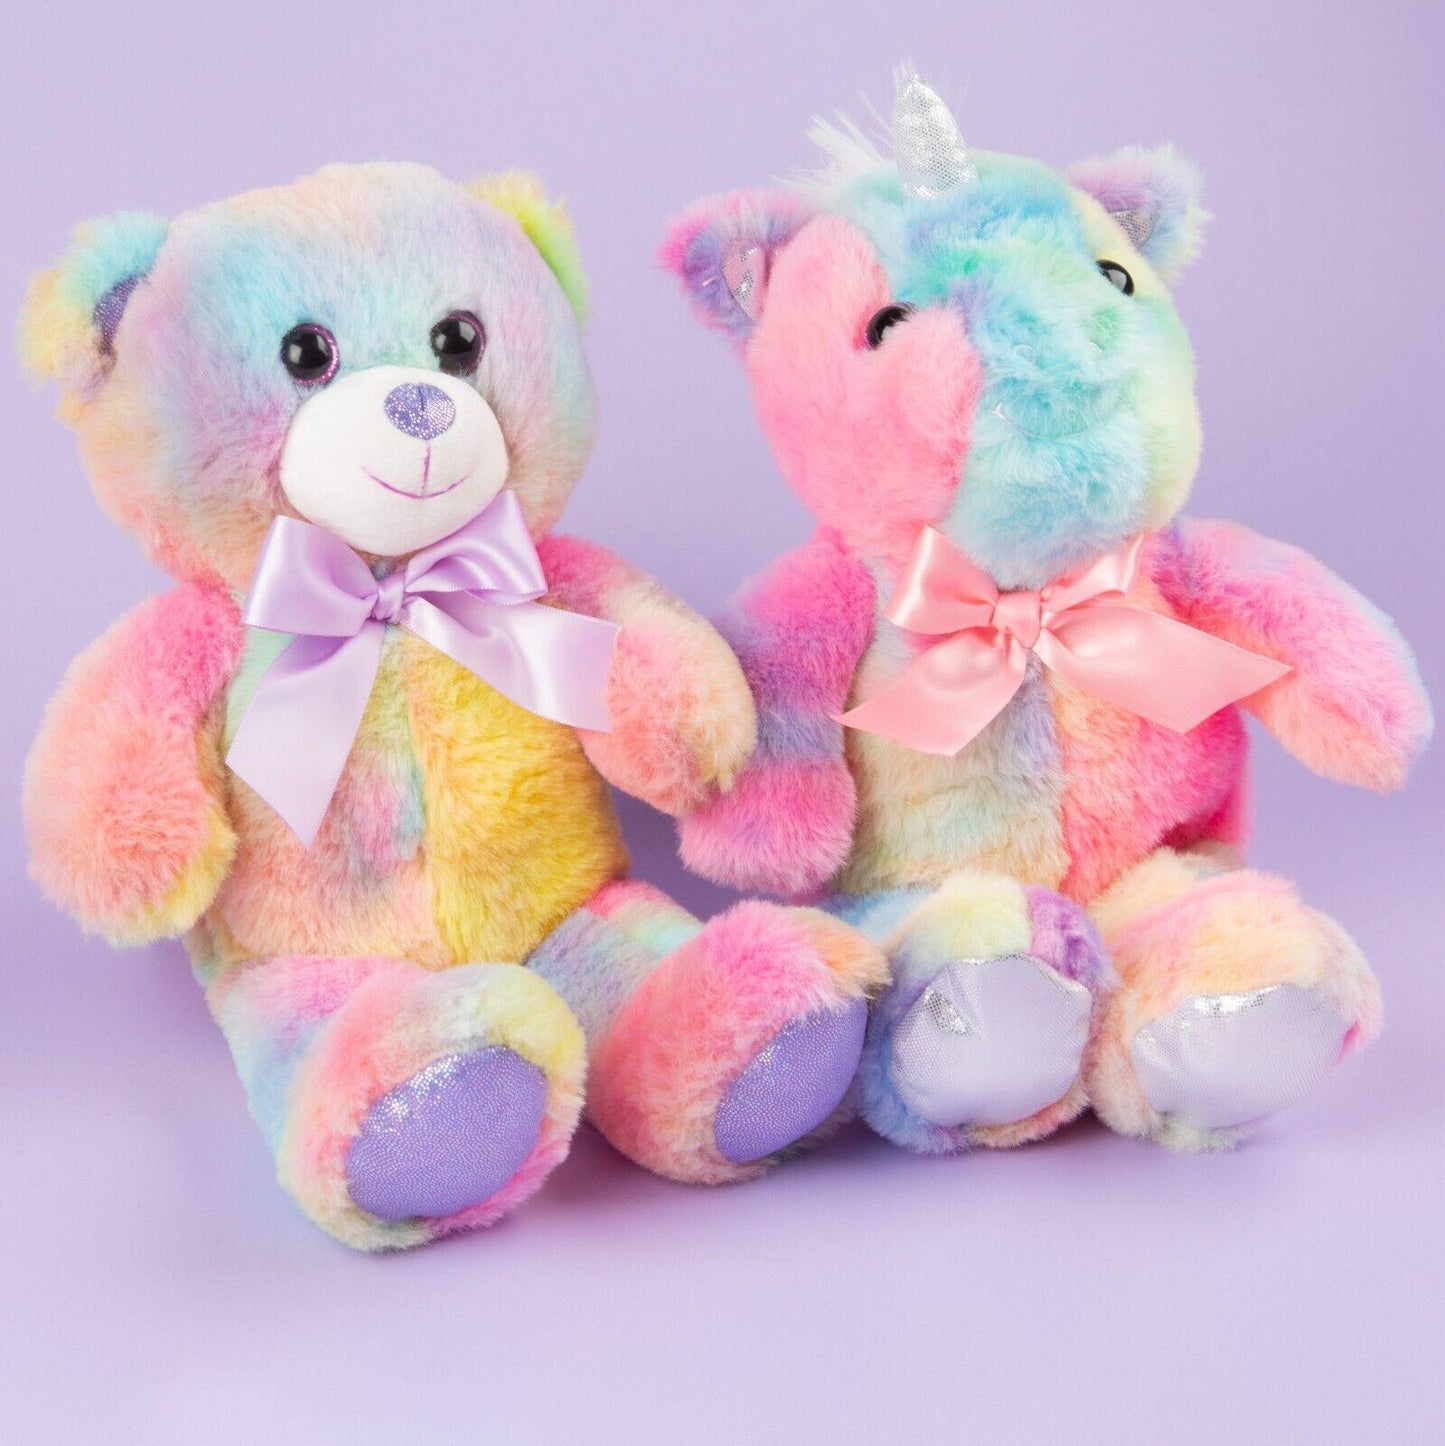 Sew Your Own Plush Toy Make Your Own Activity - Teddy Bear Unicorn - Home Inspired Gifts